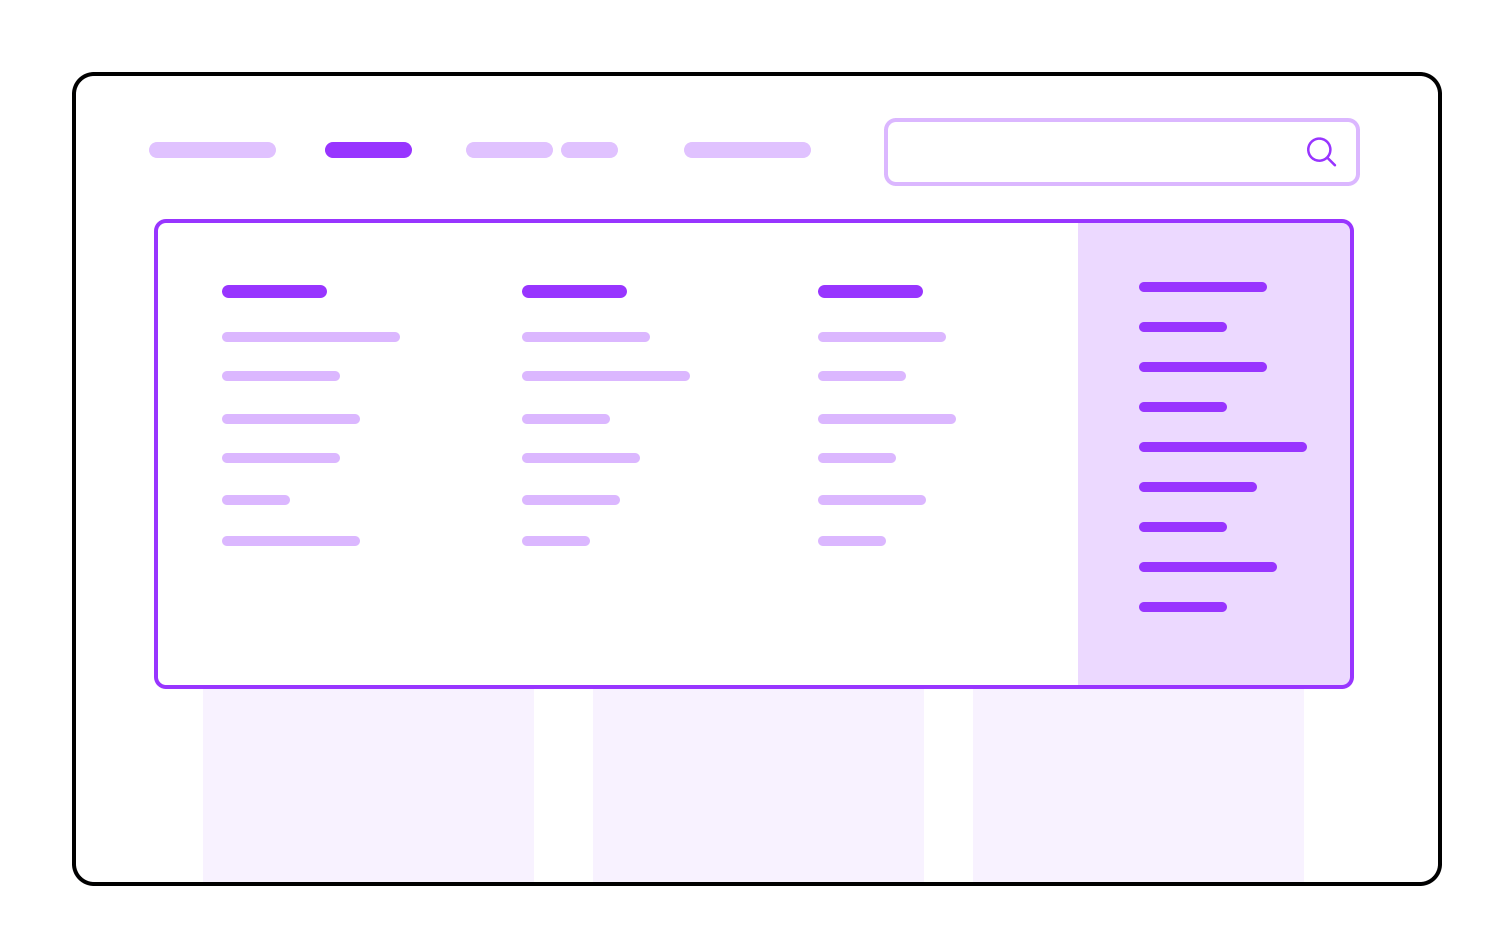 Diagram of multi-page website navigation showing multiple sections and a search bar.